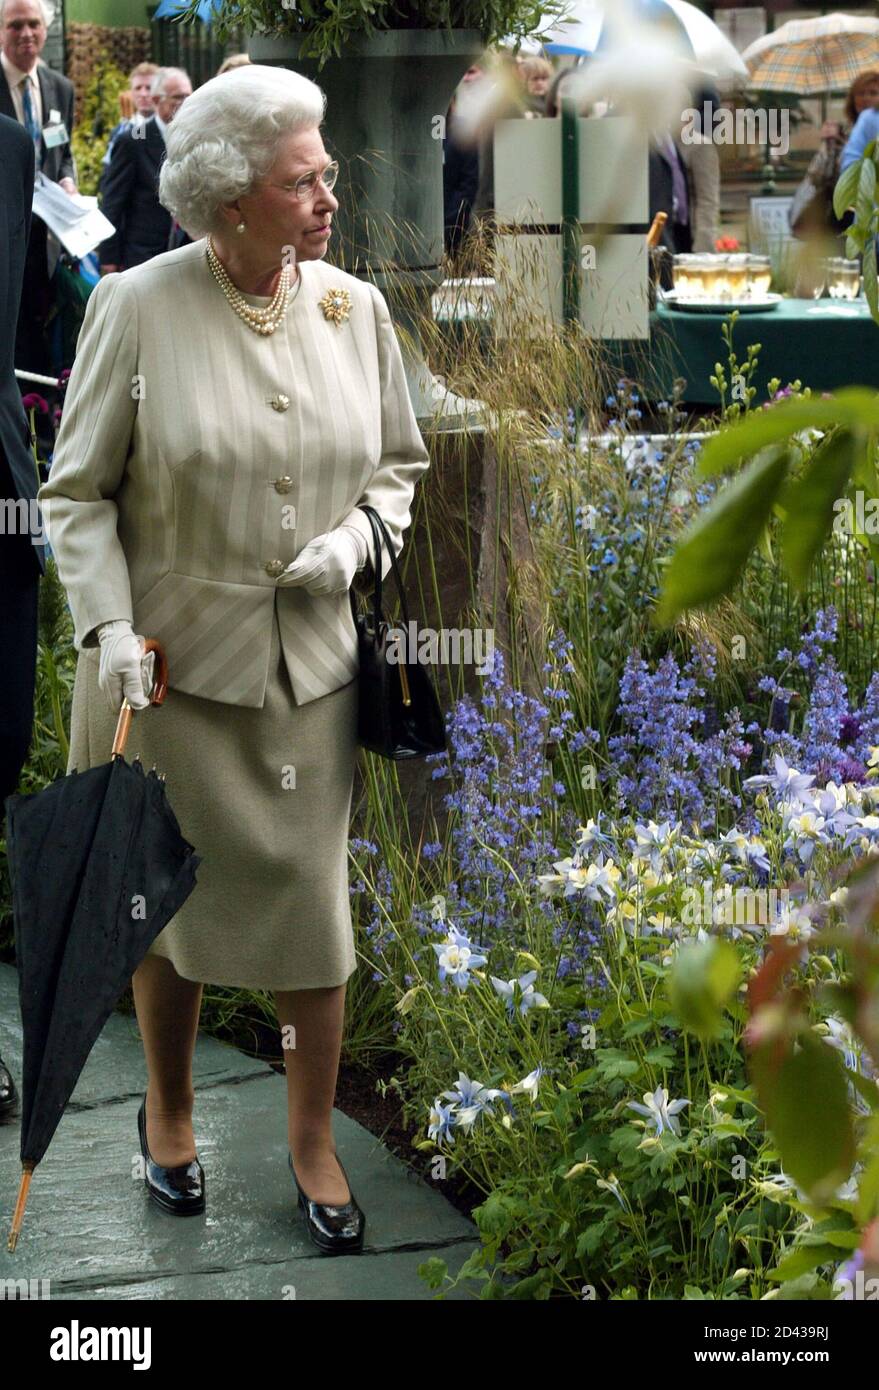 Britain's Queen Elizabeth II examines exhibits during her visit to the Royal Horticultural Society's Chelsea Flower Show in London May 19, 2003. Thousands of visitors are expected to attend the 81st annual show, organised by the Royal Horticultural Society and held at the Royal Hospital in Chelsea, west London. REUTERS/Stephen Hird  SH/NMB Stock Photo